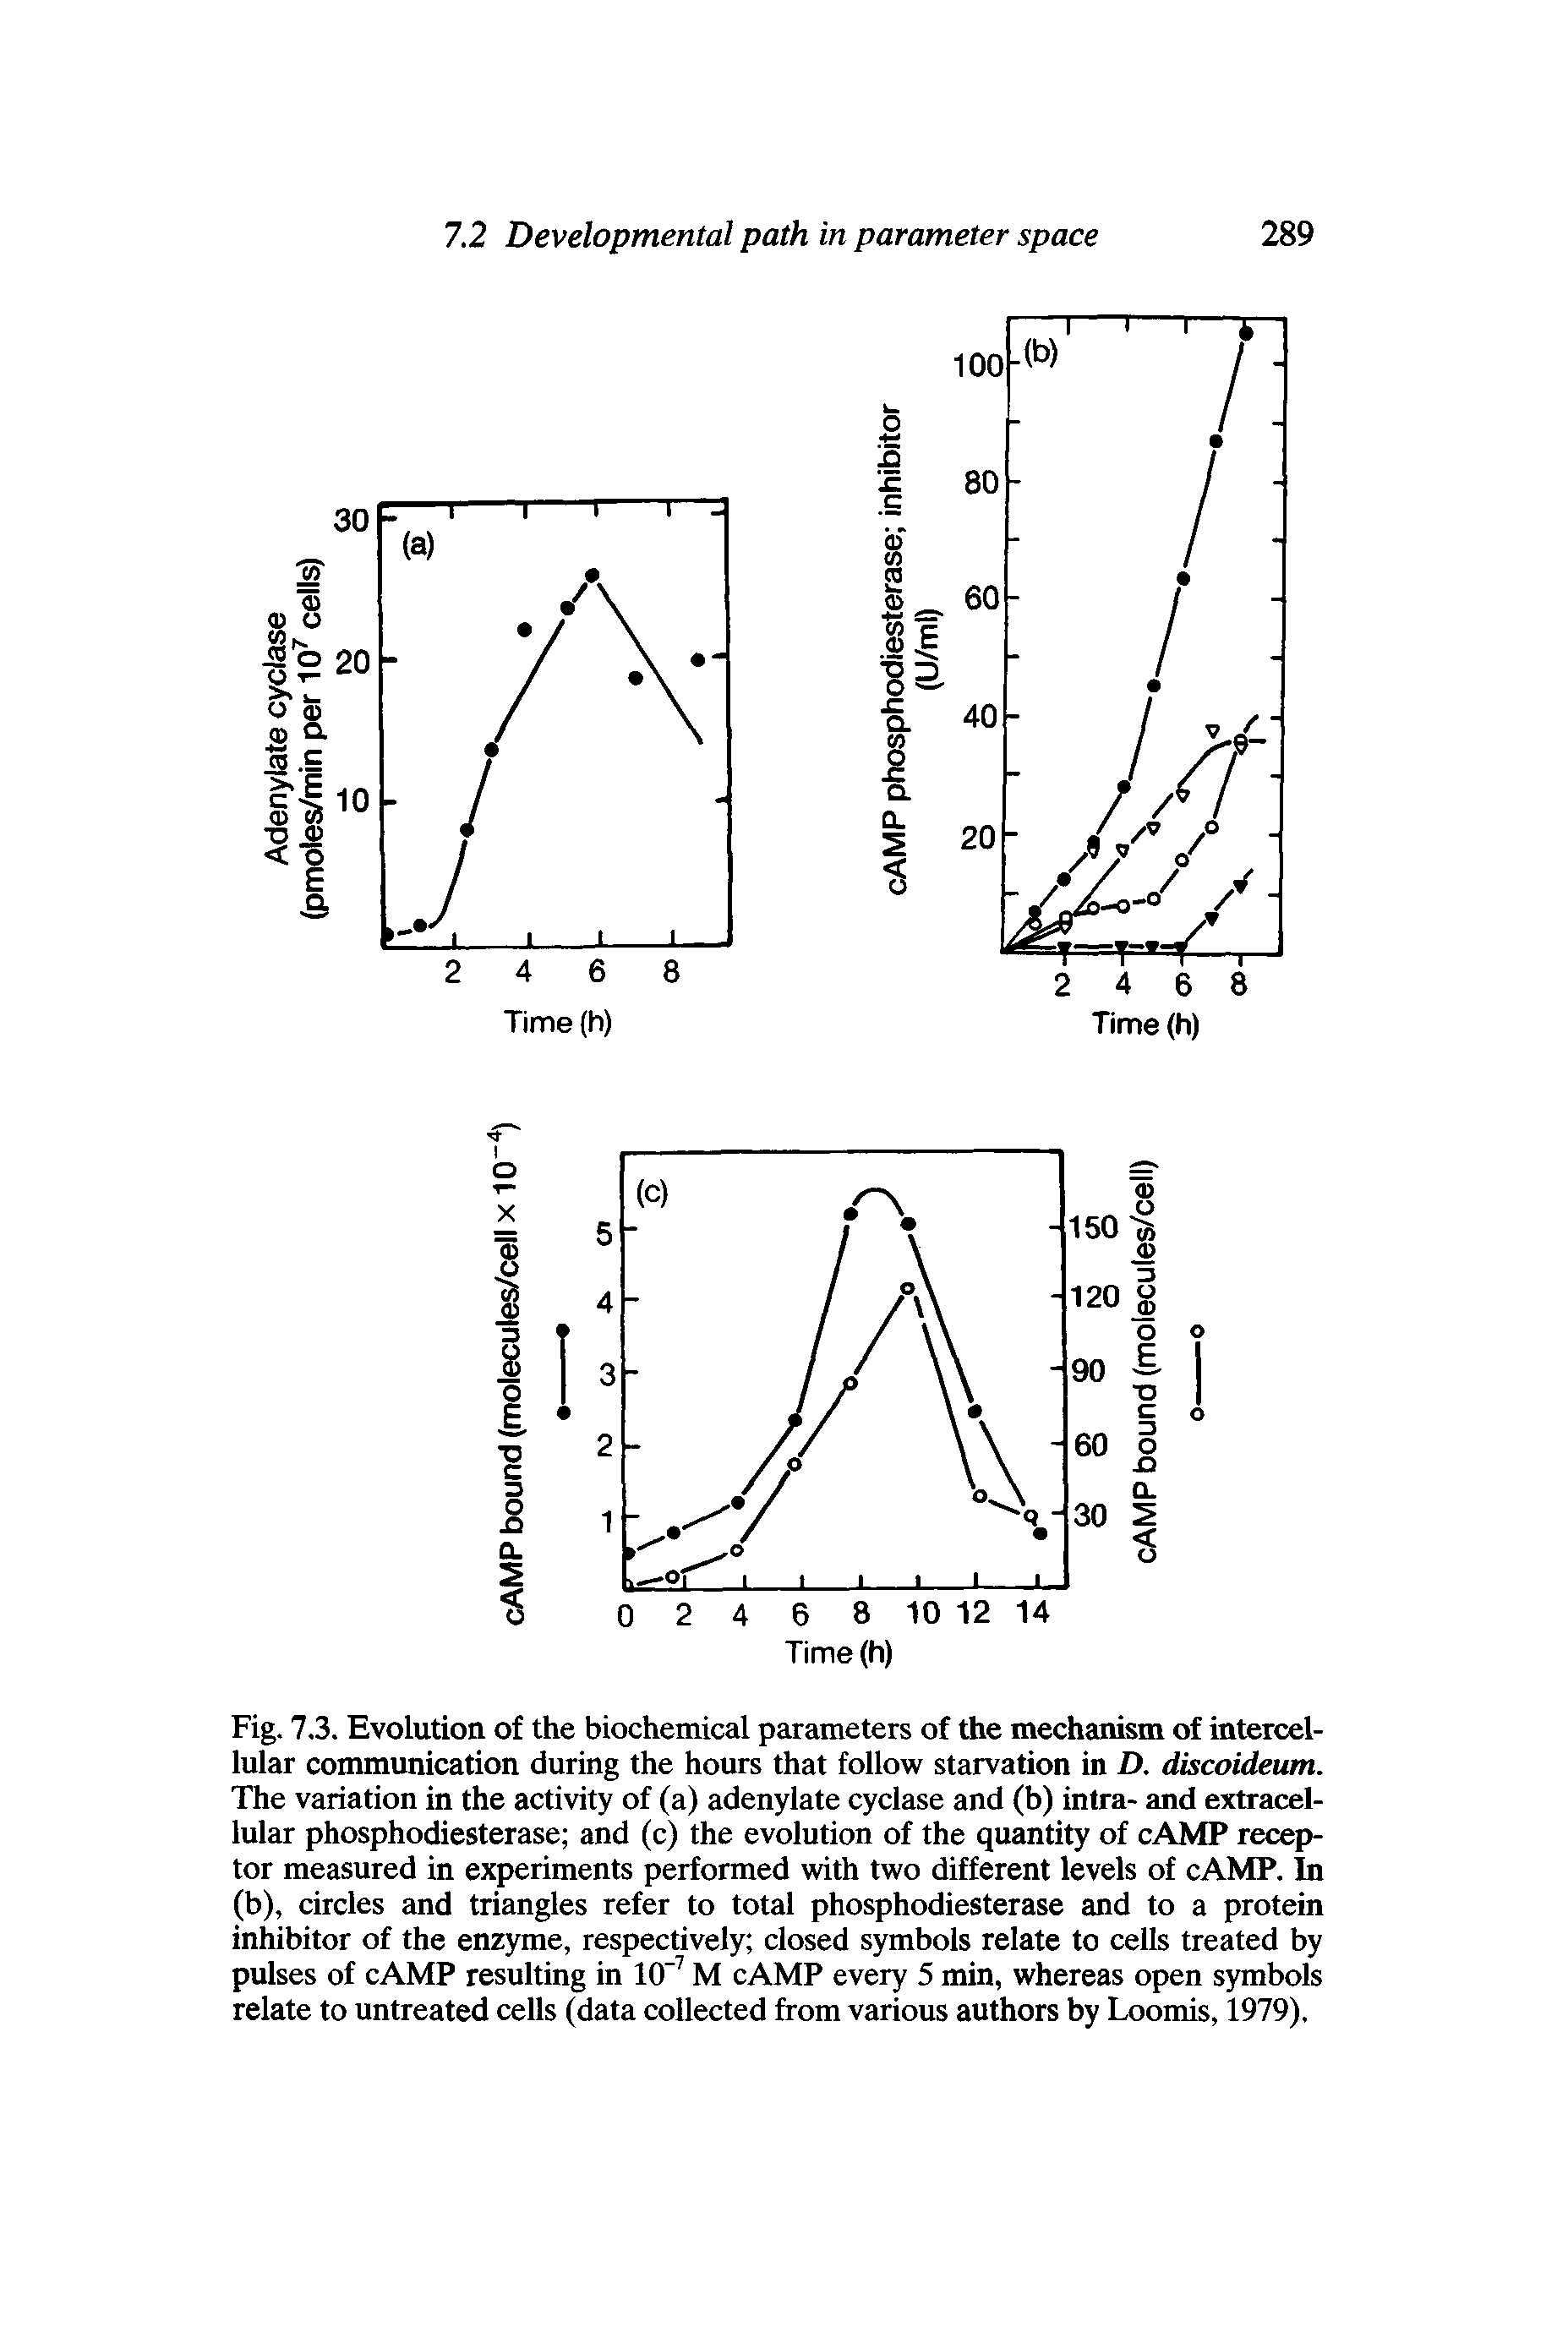 Fig. 7.3. Evolution of the biochemical parameters of the mechanism of intercellular communication during the hours that follow starvation in D. discoideum. The variation in the activity of (a) adenylate cyclase and (b) intra- and extracellular phosphodiesterase and (c) the evolution of the quantity of cAMP receptor measured in experiments performed with two different levels of cAMP. In (b), circles and triangles refer to total phosphodiesterase and to a protein inhibitor of the enzyme, respectively closed symbols relate to cells treated by pulses of cAMP resulting in 10" M cAMP every 5 min, whereas open symbols relate to untreated cells (data collected from various authors by Loomis, 1979).